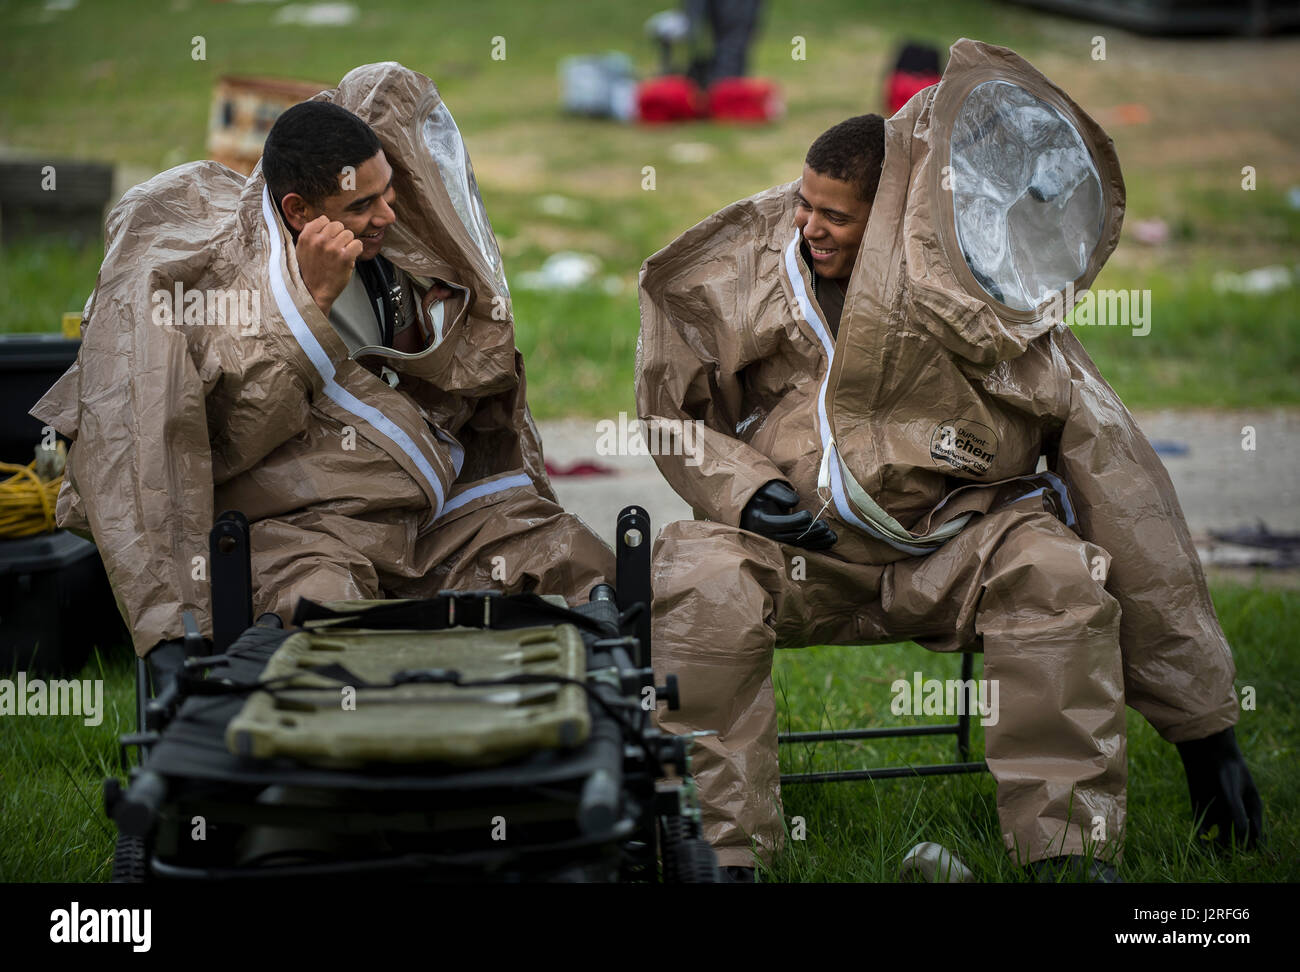 Pvt. Trae Herron and Spc. Gabriel Gomez, U.S. Army Soldiers with the 51st Chemical Biological Radiological Nuclear Company, of Fort Stewart, Georgia, joke around while wearing Level A chemical suits during Guardian Response 17 at the Muscatatuck Urban Training Center, Indiana, April 27, 2017. Guardian Response, as part of Vibrant Response, is a multi-component training exercise run by the U.S. Army Reserve designed to validate nearly 4,000 service members in Defense Support of Civil Authorities (DSCA) in the event of a Chemical, Biological, Radiological and Nuclear (CBRN) catastrophe. This yea Stock Photo